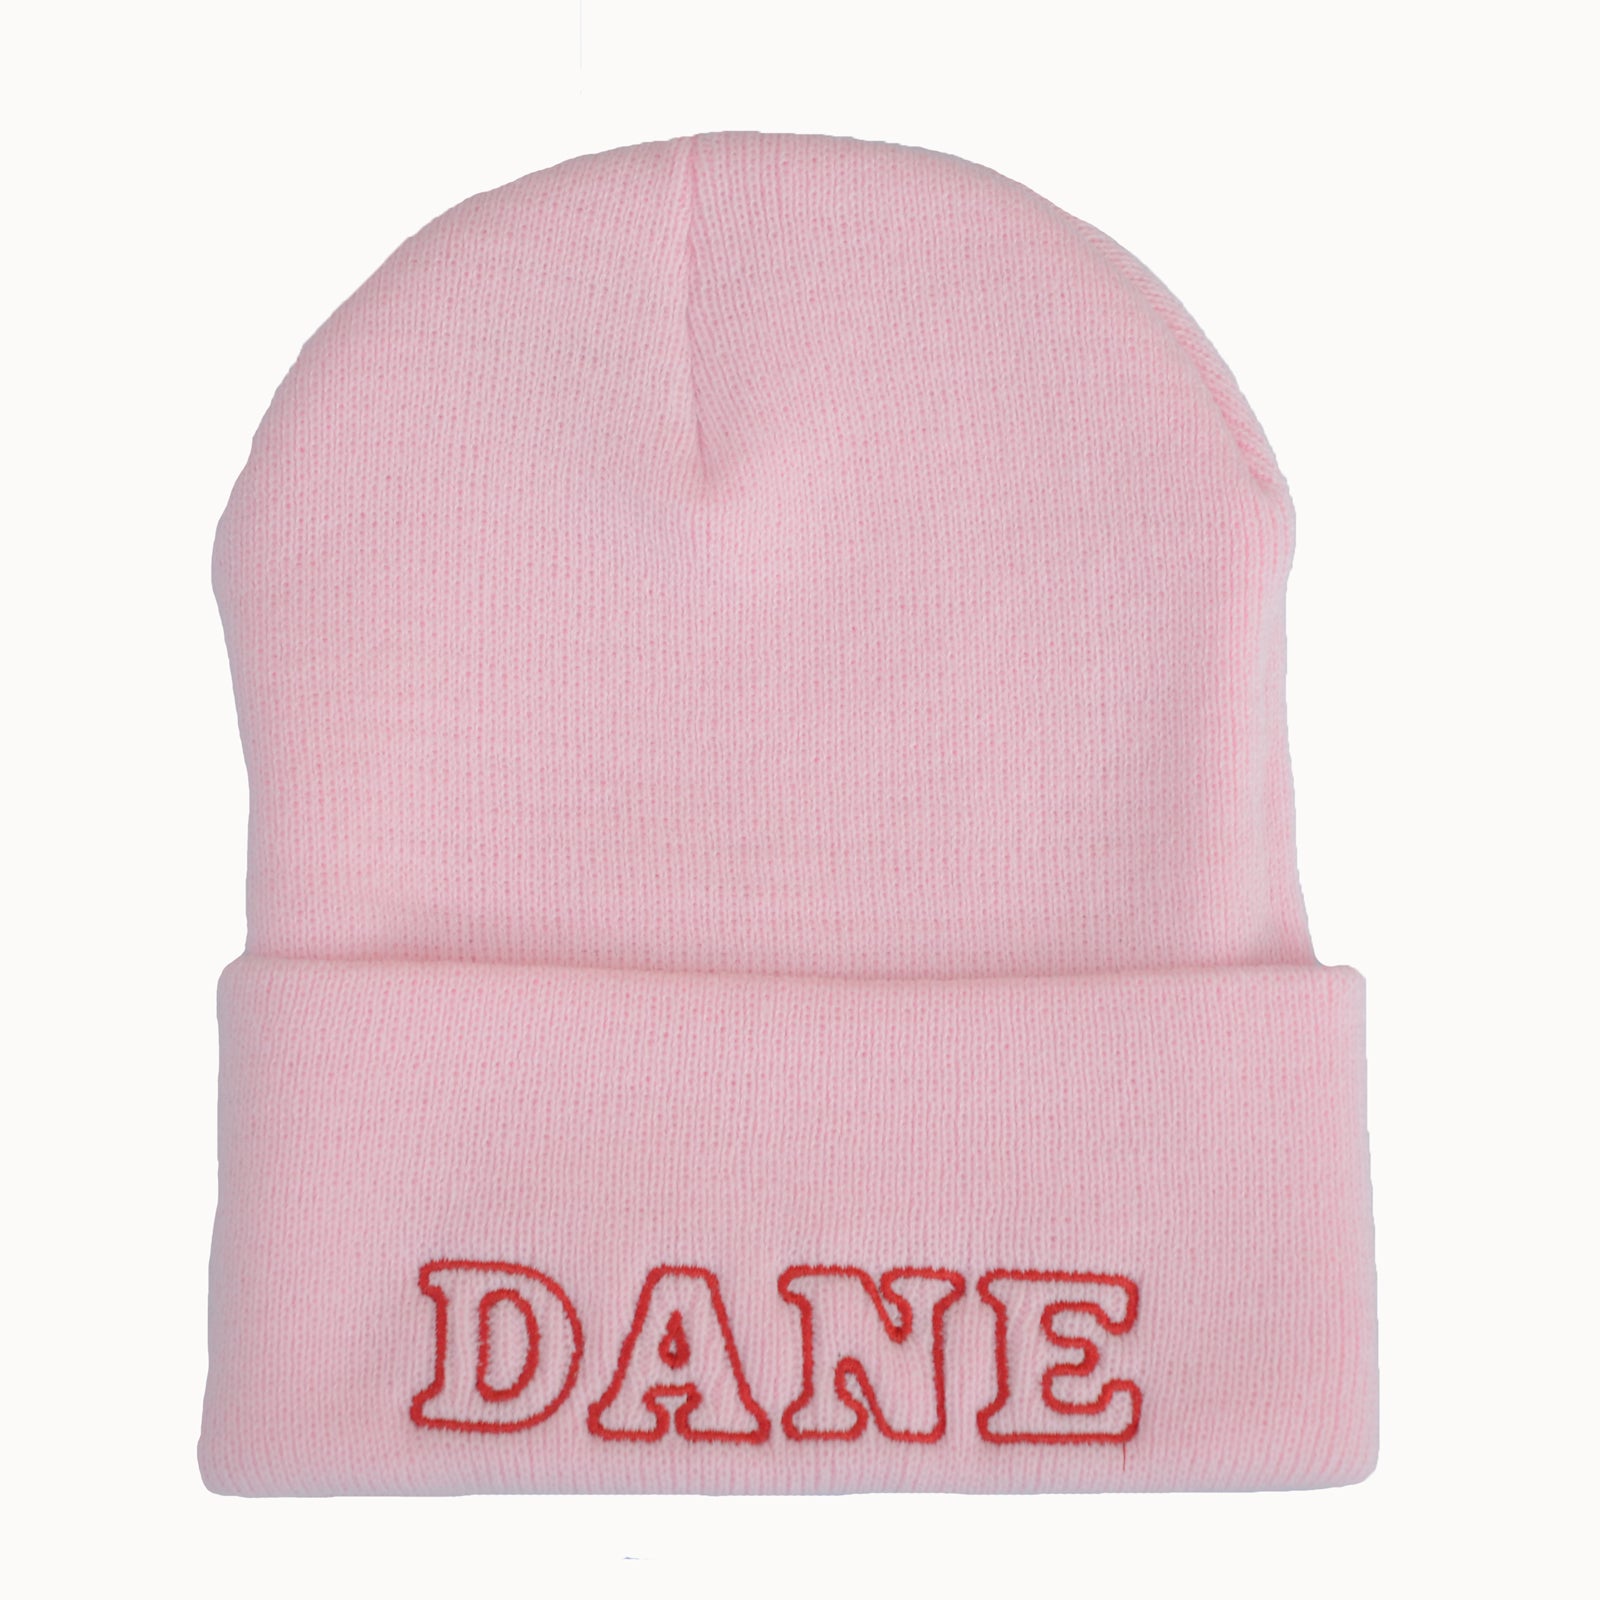 Adult Knit Beanie - DANE, pink & red